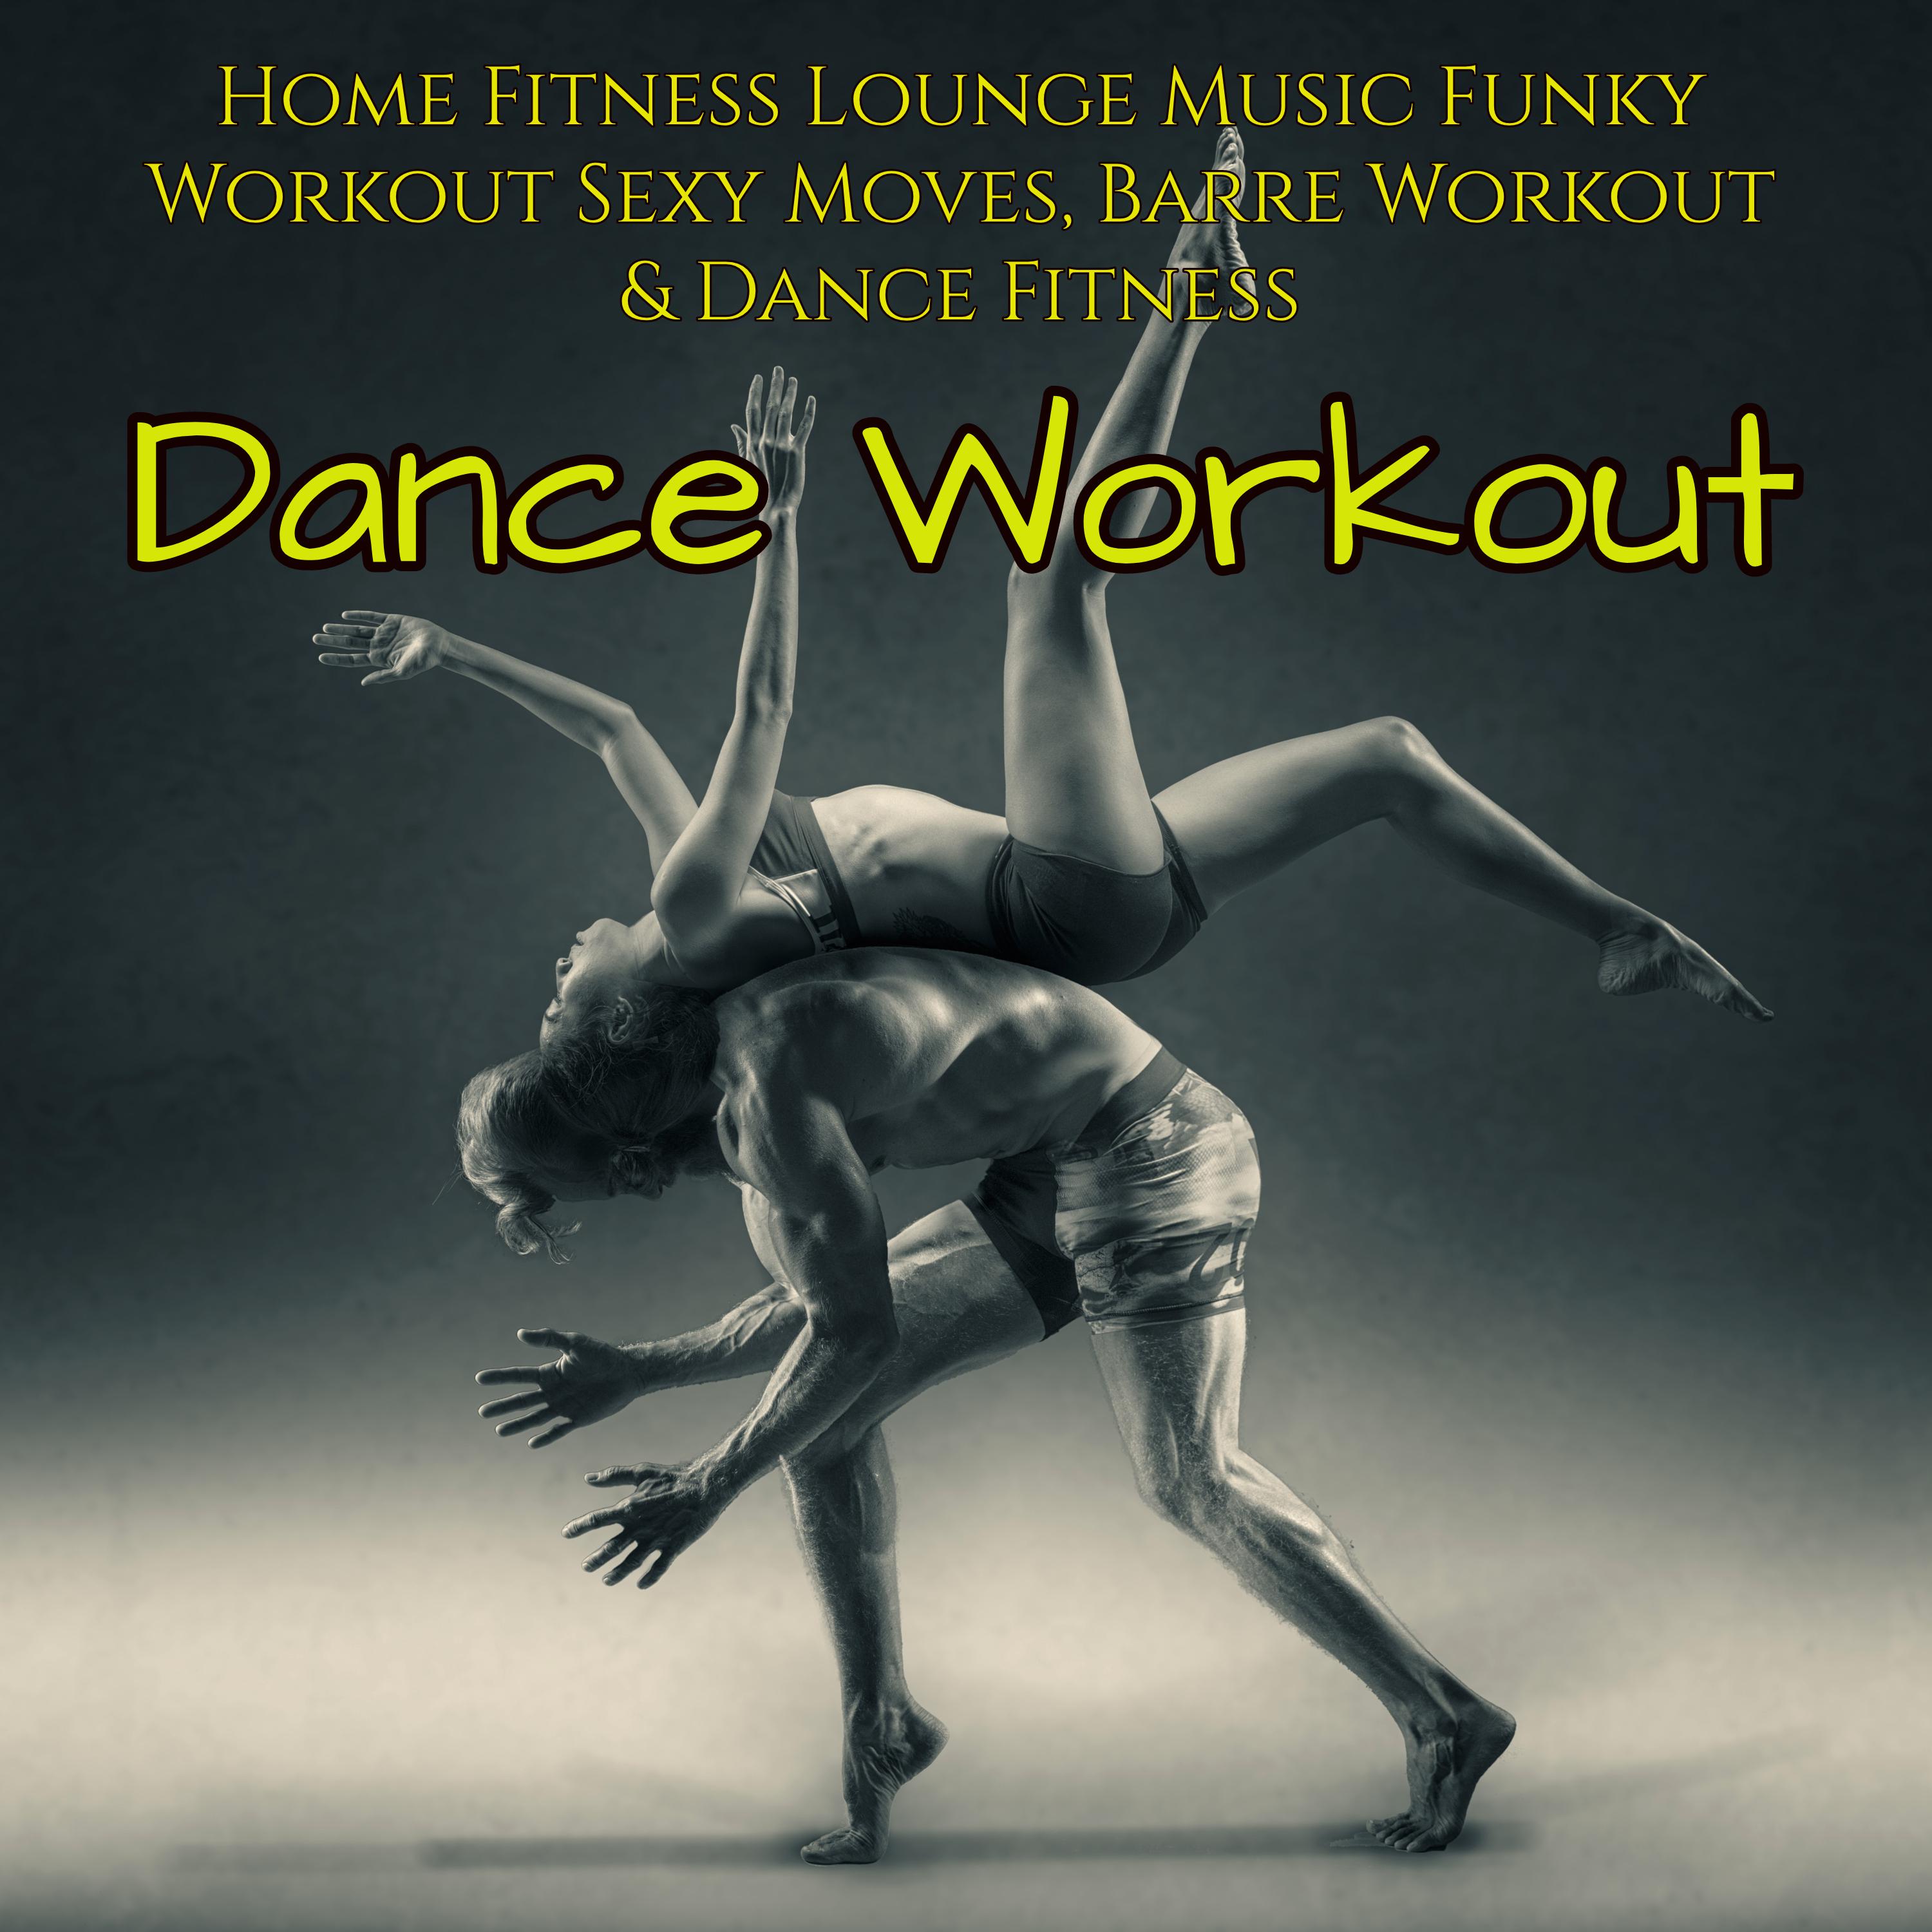 Dance Workout  Home Fitness Lounge Music Funky Workout  Moves, Barre Workout  Dance Fitness